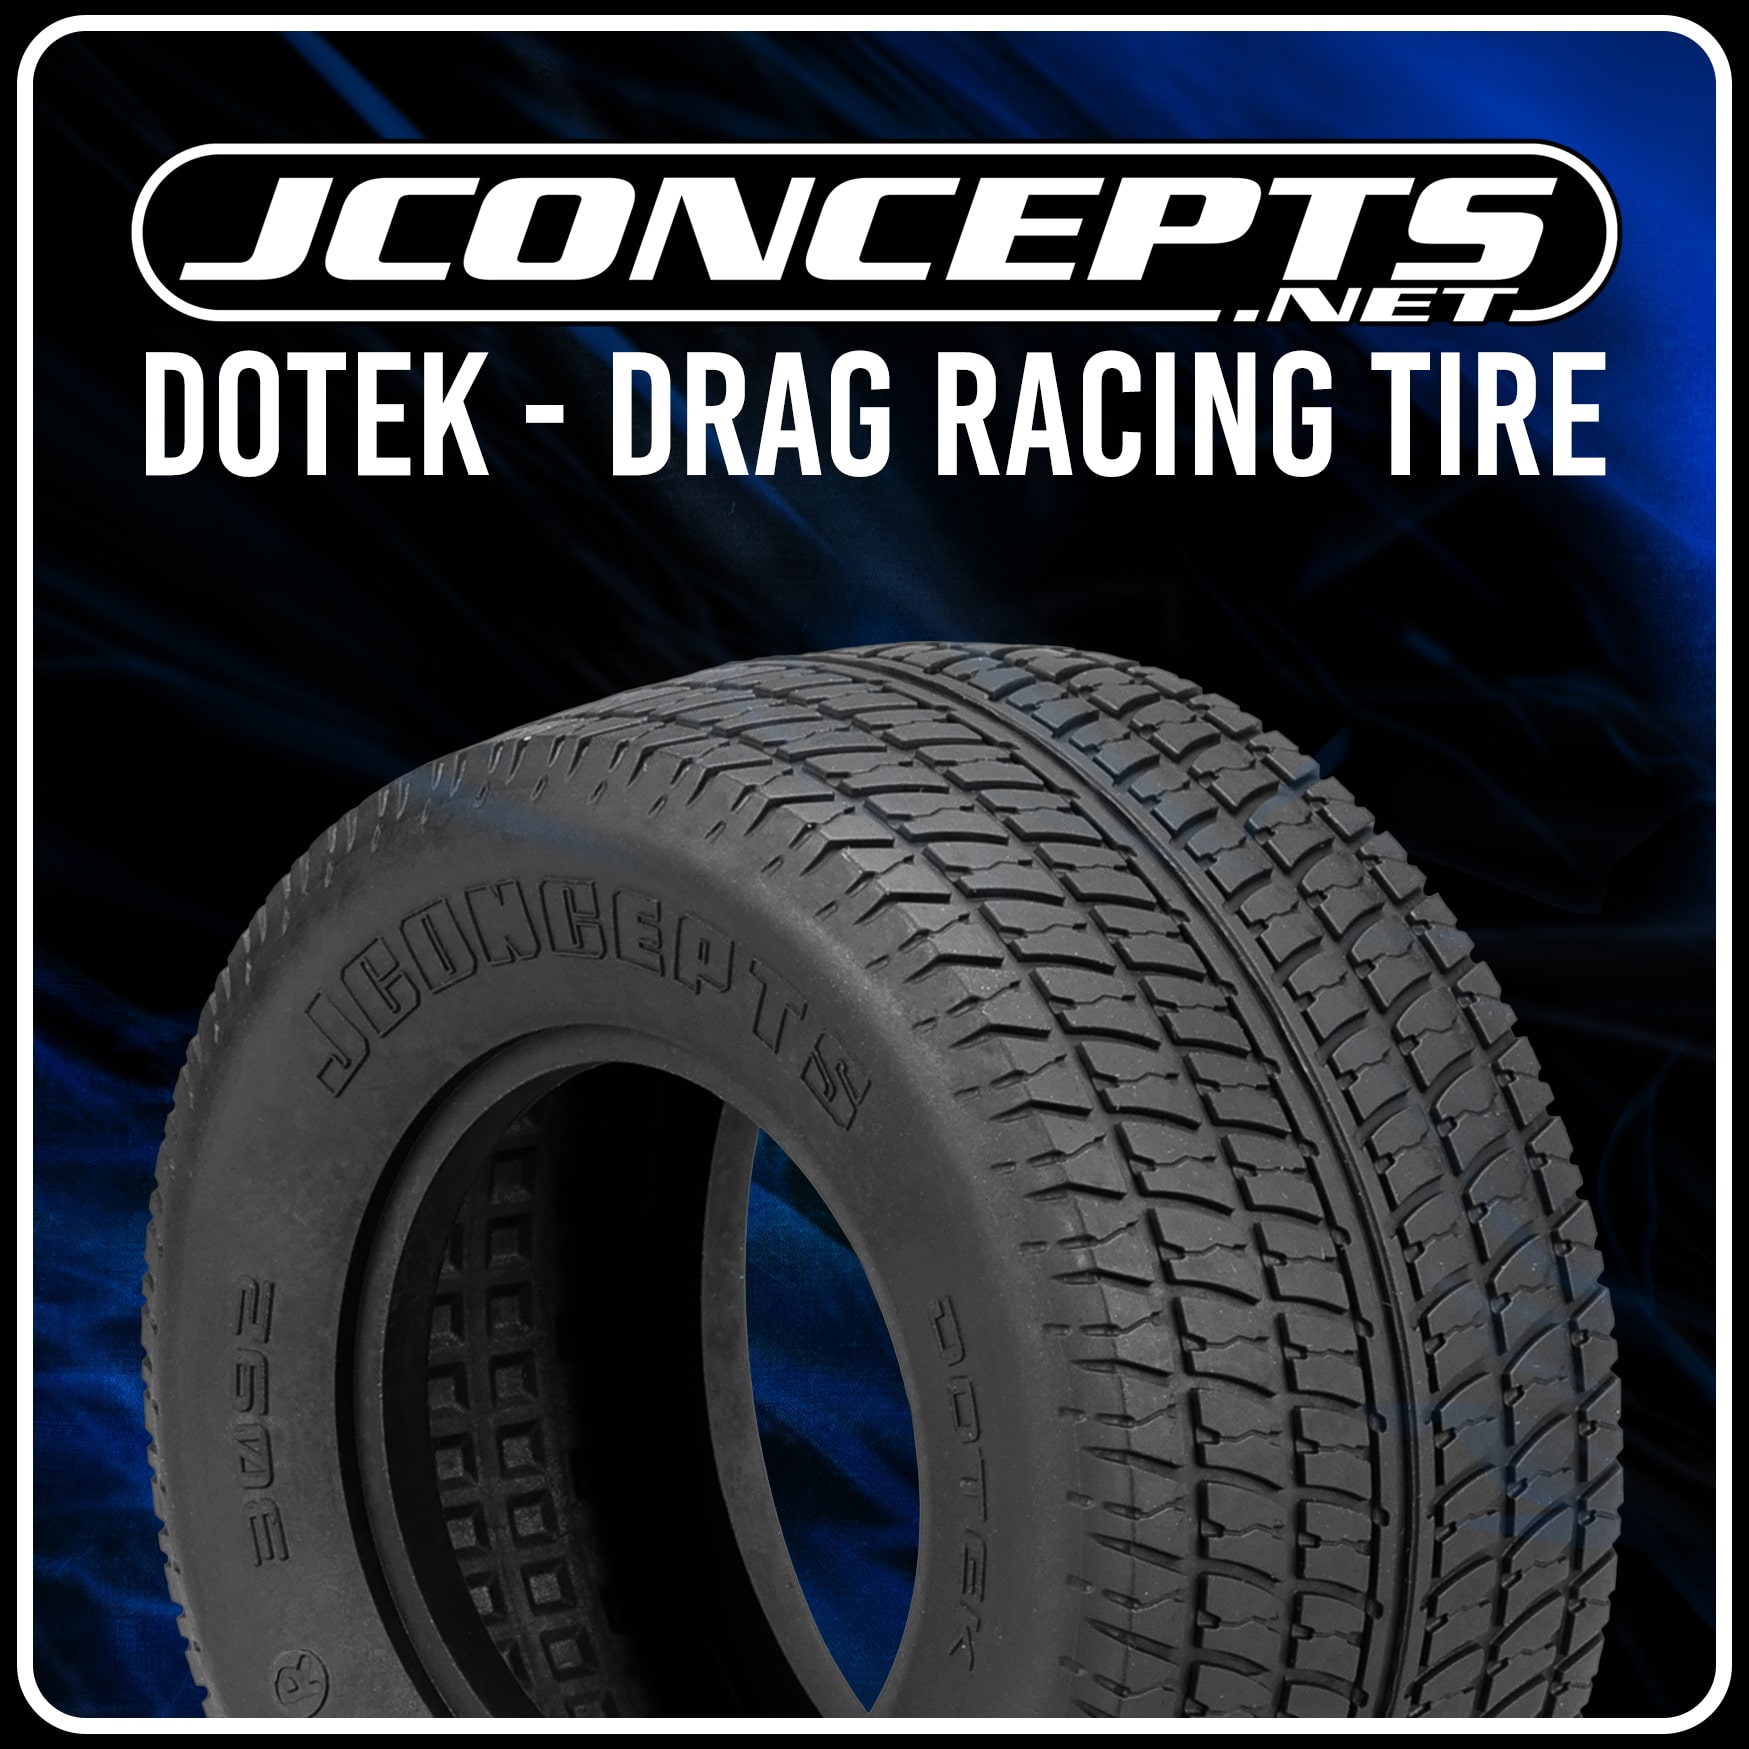 JConcepts New Release – Fuzz Bite And Pin Swag Carpet Tires – JConcepts Blog